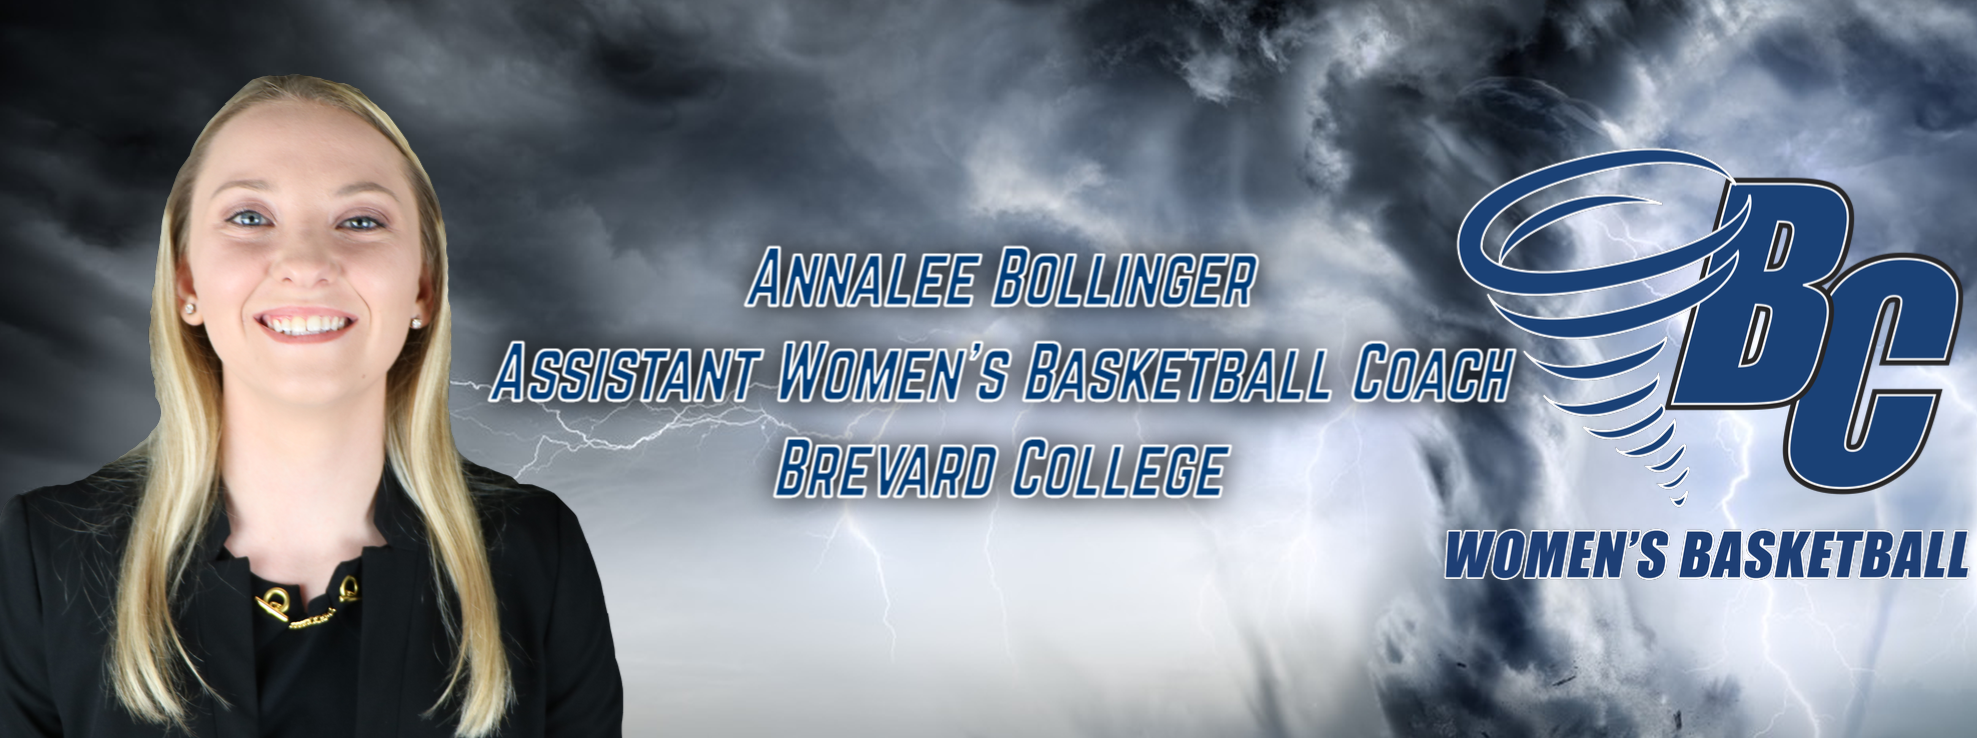 BC Alumna Annalee Bollinger Named Assistant Coach